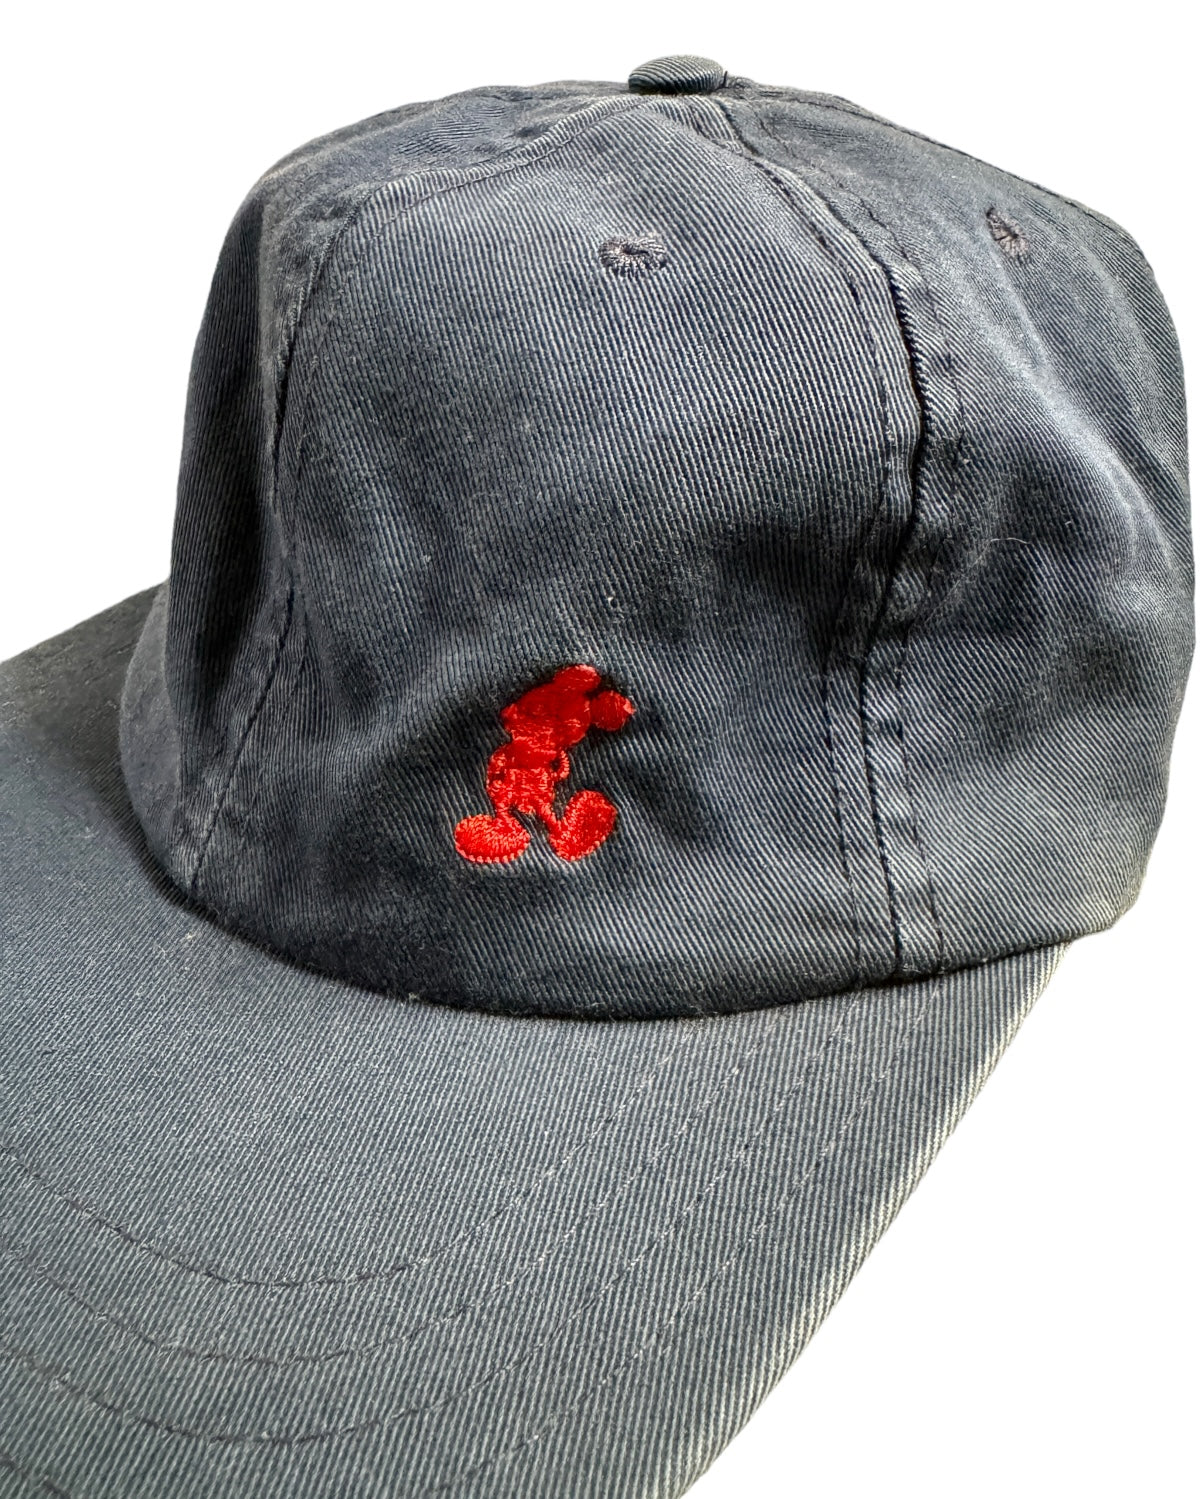 Vintage Mickey Mouse Dad Hat - Navy